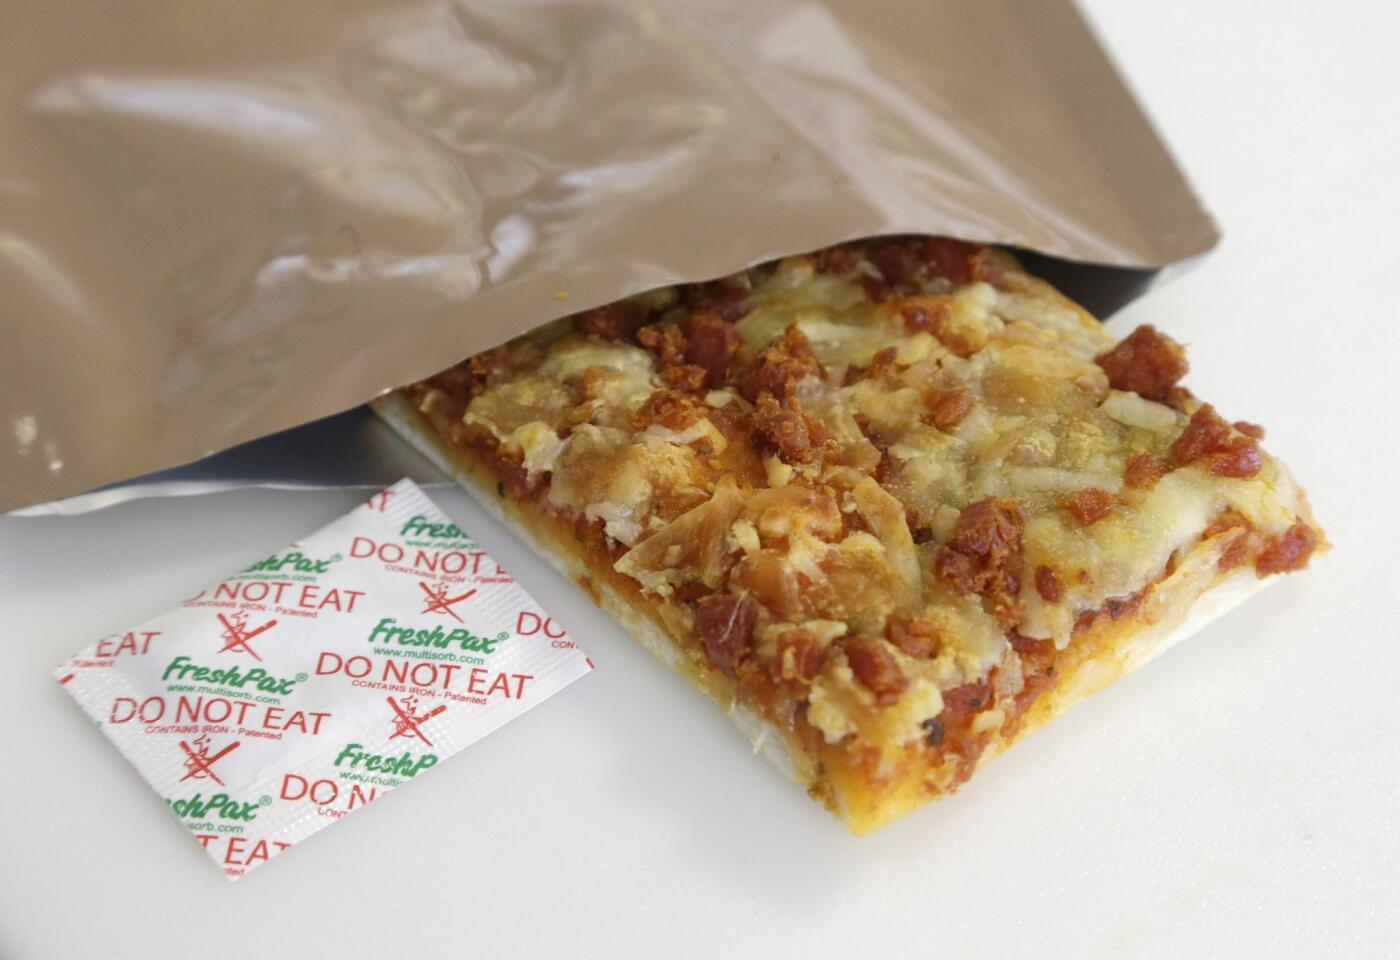 A slice of prototype pizza, in development to be used in military MREs (meals ready to eat), is shown in its packet with a smaller, freshness-keeping packet known as an oxygen scavenger. The pizza is being developed at the U.S. Army Natick Soldier Research, Development and Engineering Center in Natick, Mass.